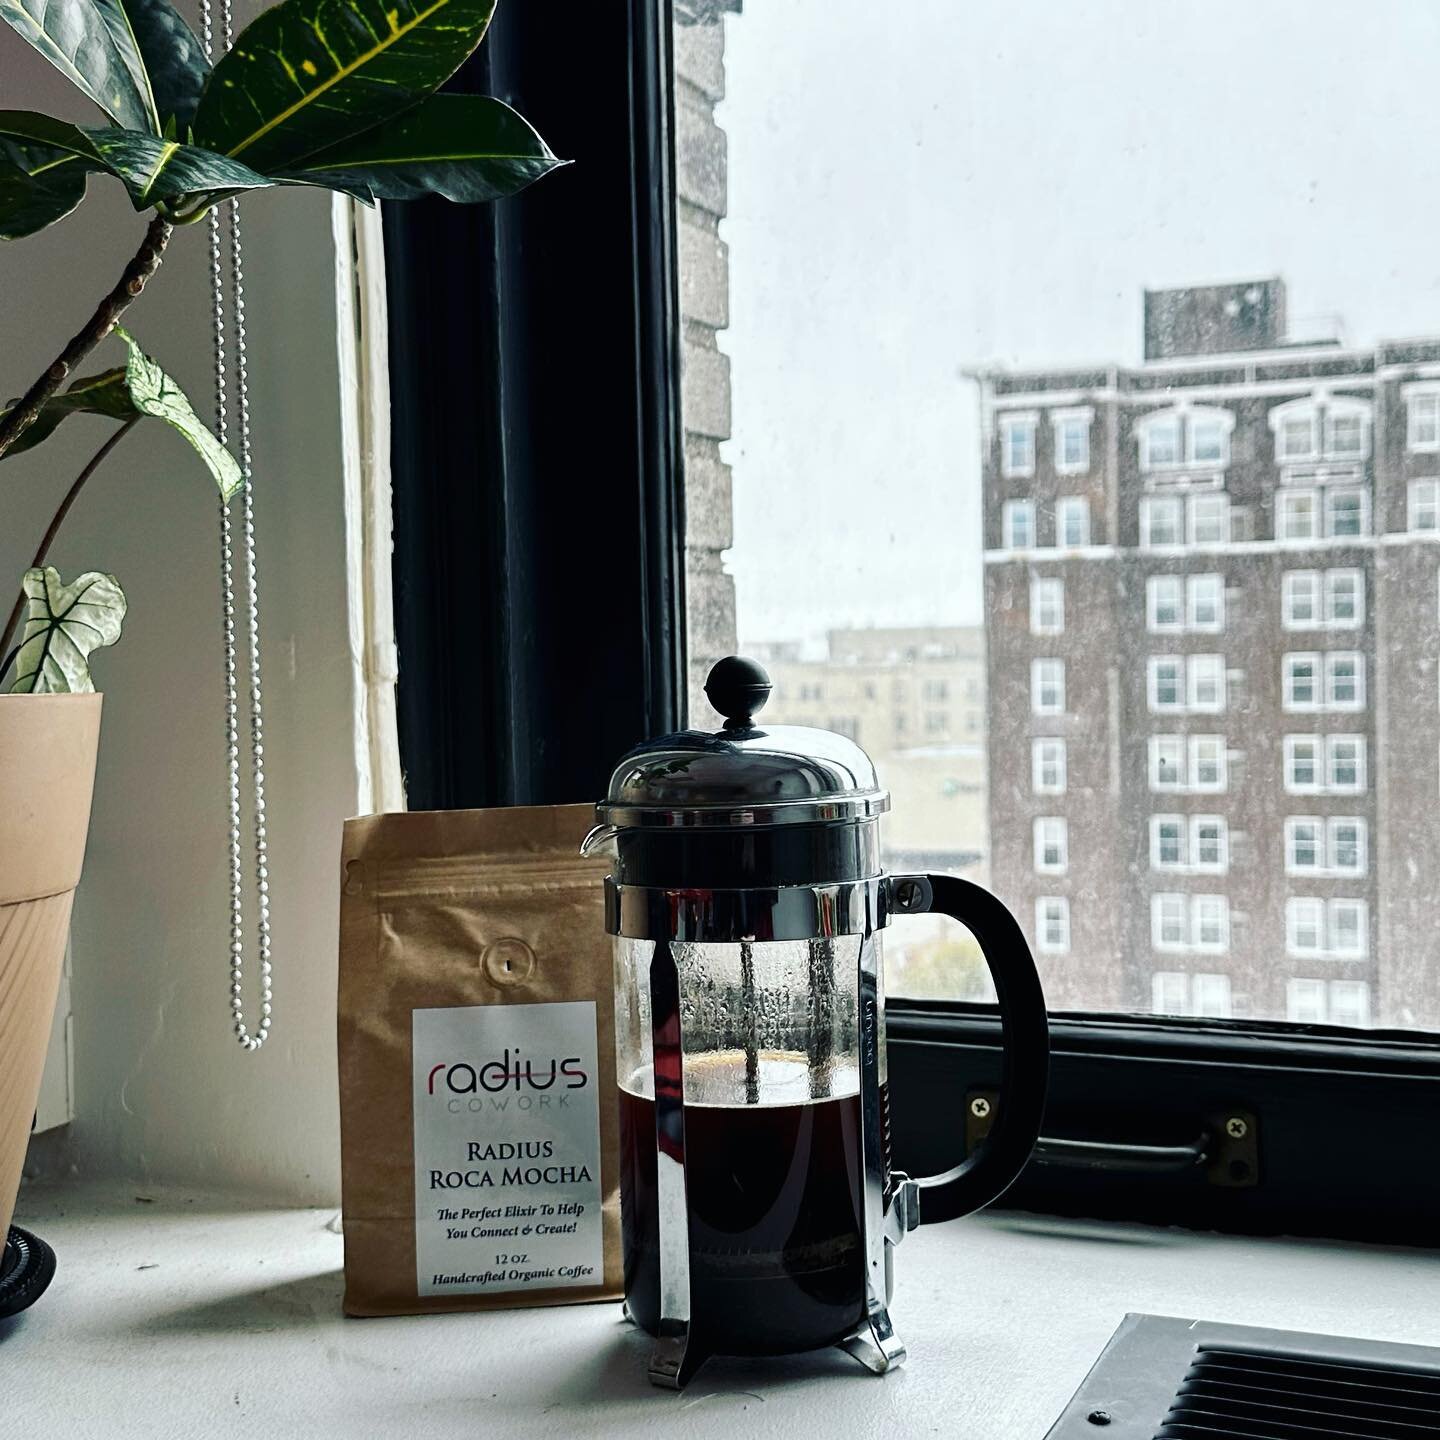 Snowing in April? The only way to cope is with a cup of Radius Roca Mocha. 🌨️☕️